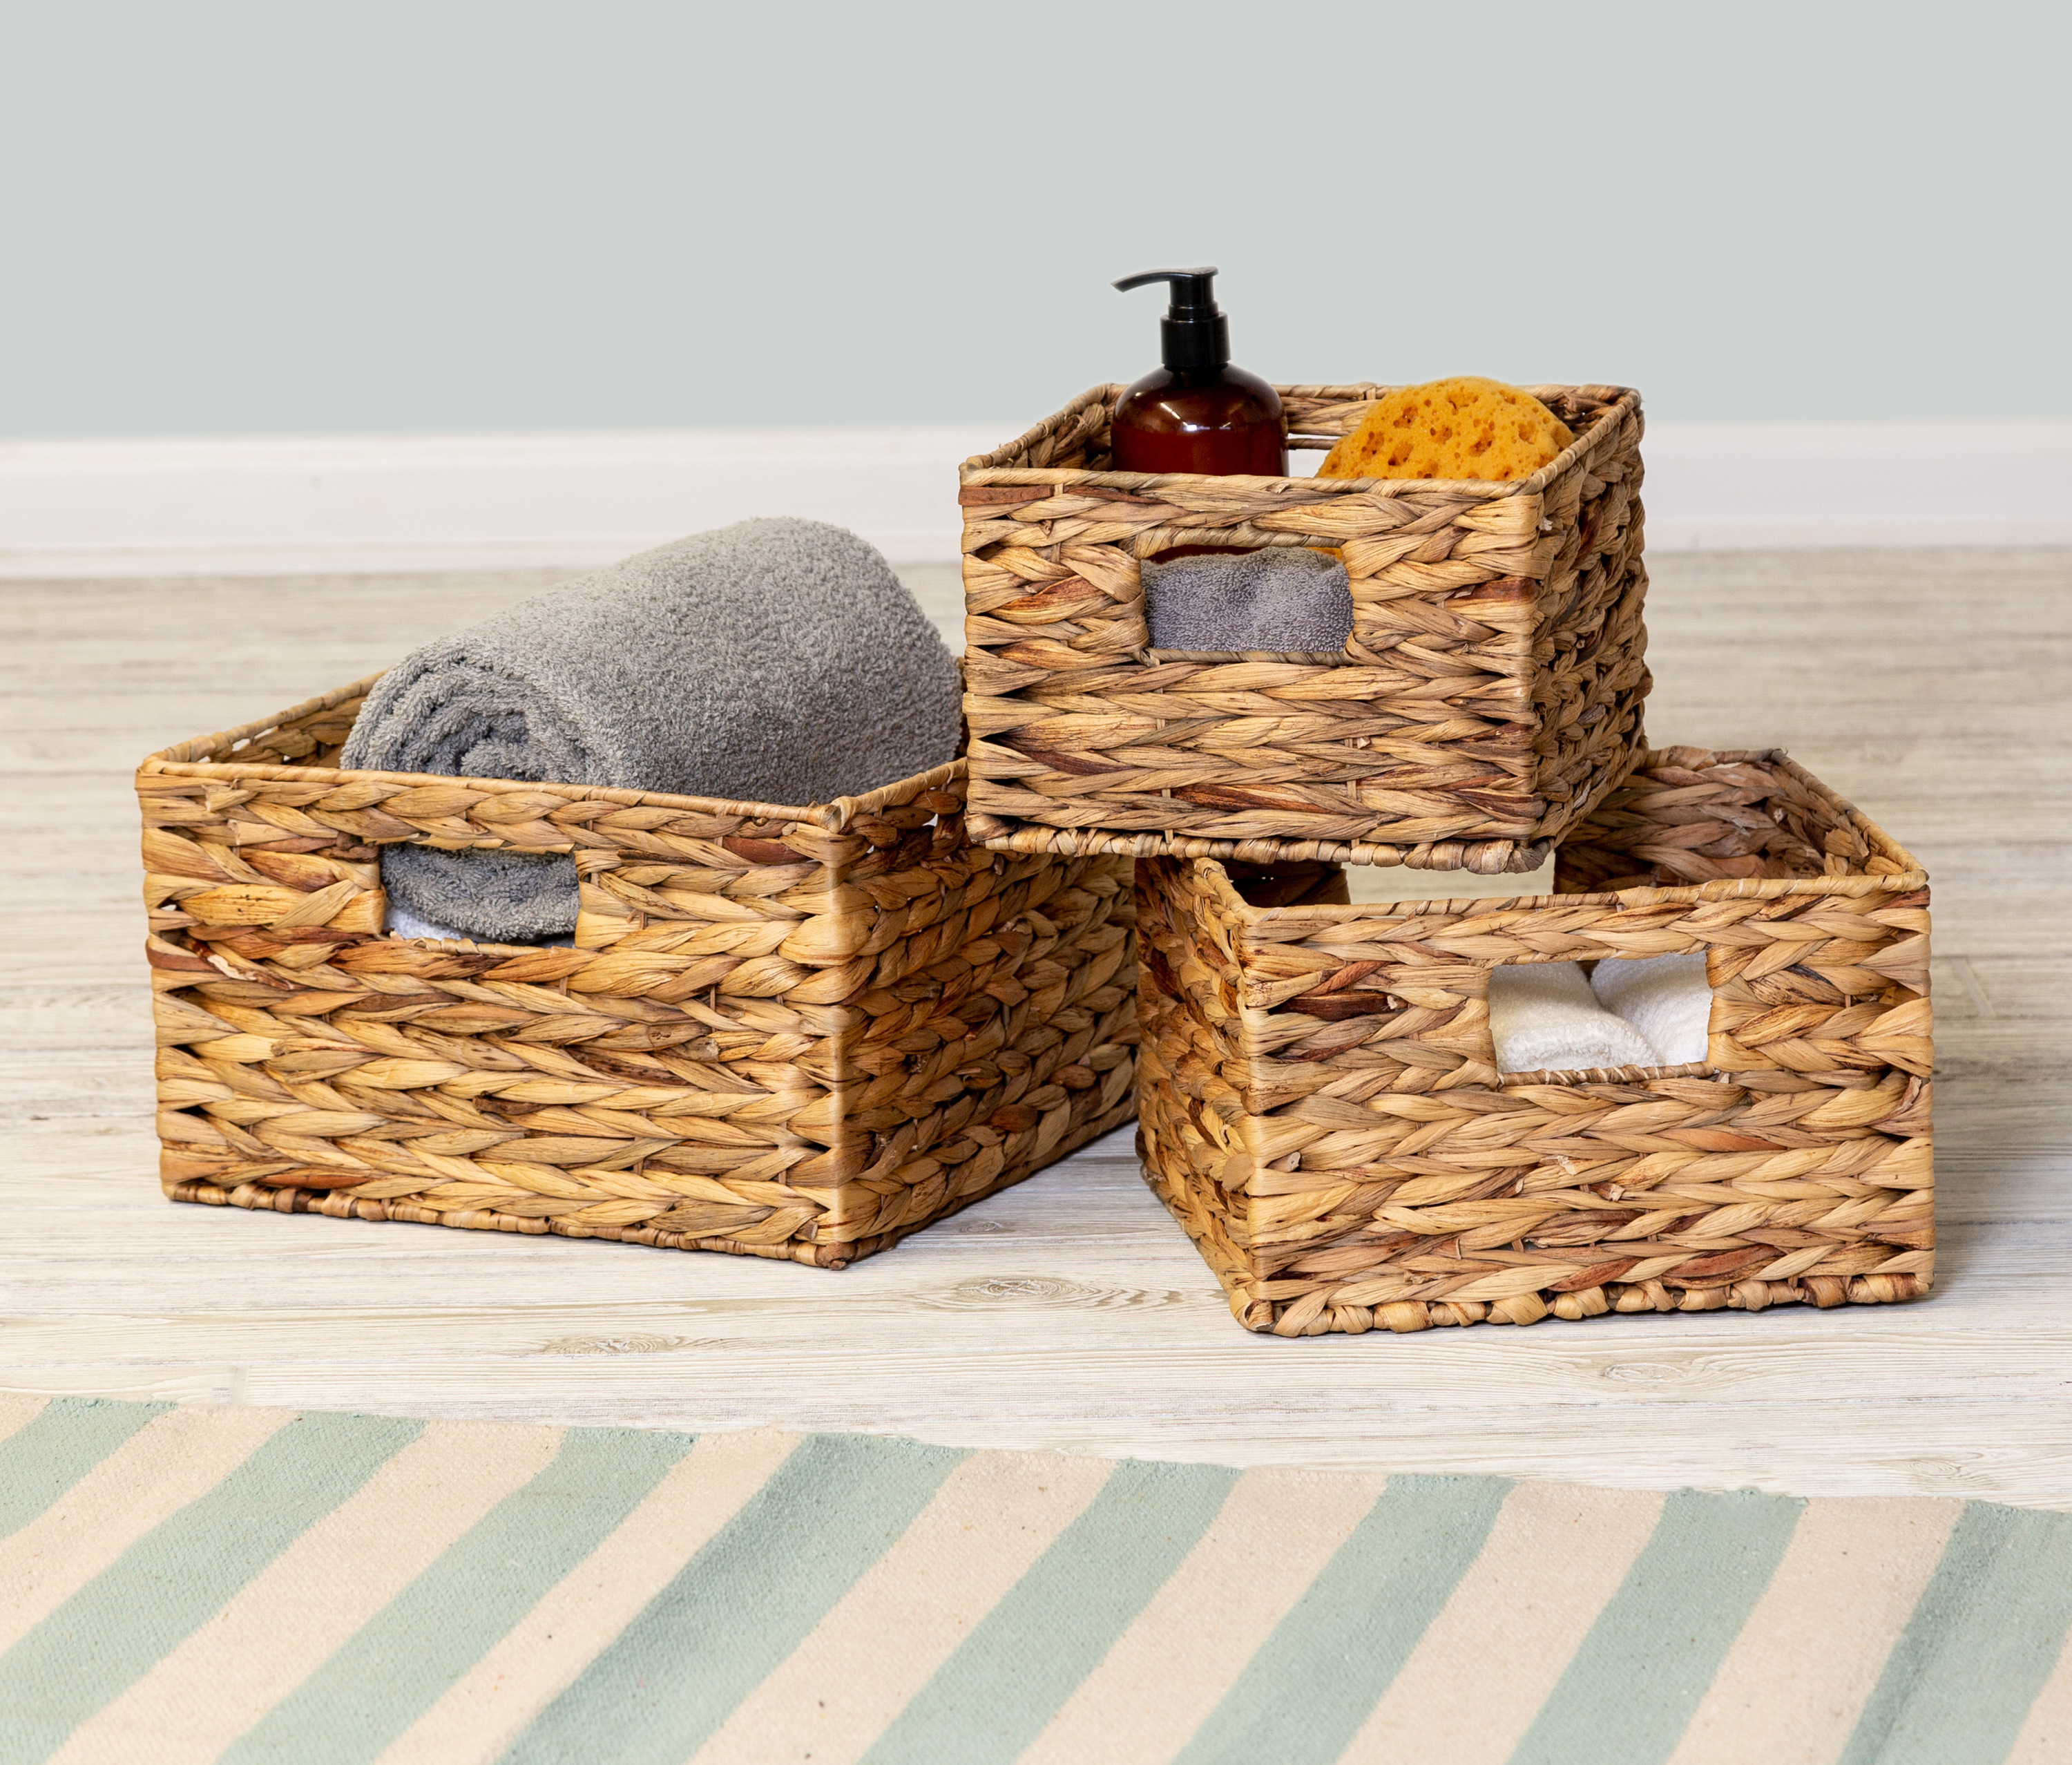 Honey-Can-Do Set of 3 Wicker Storage Nesting Baskets with Handles - image 2 of 5